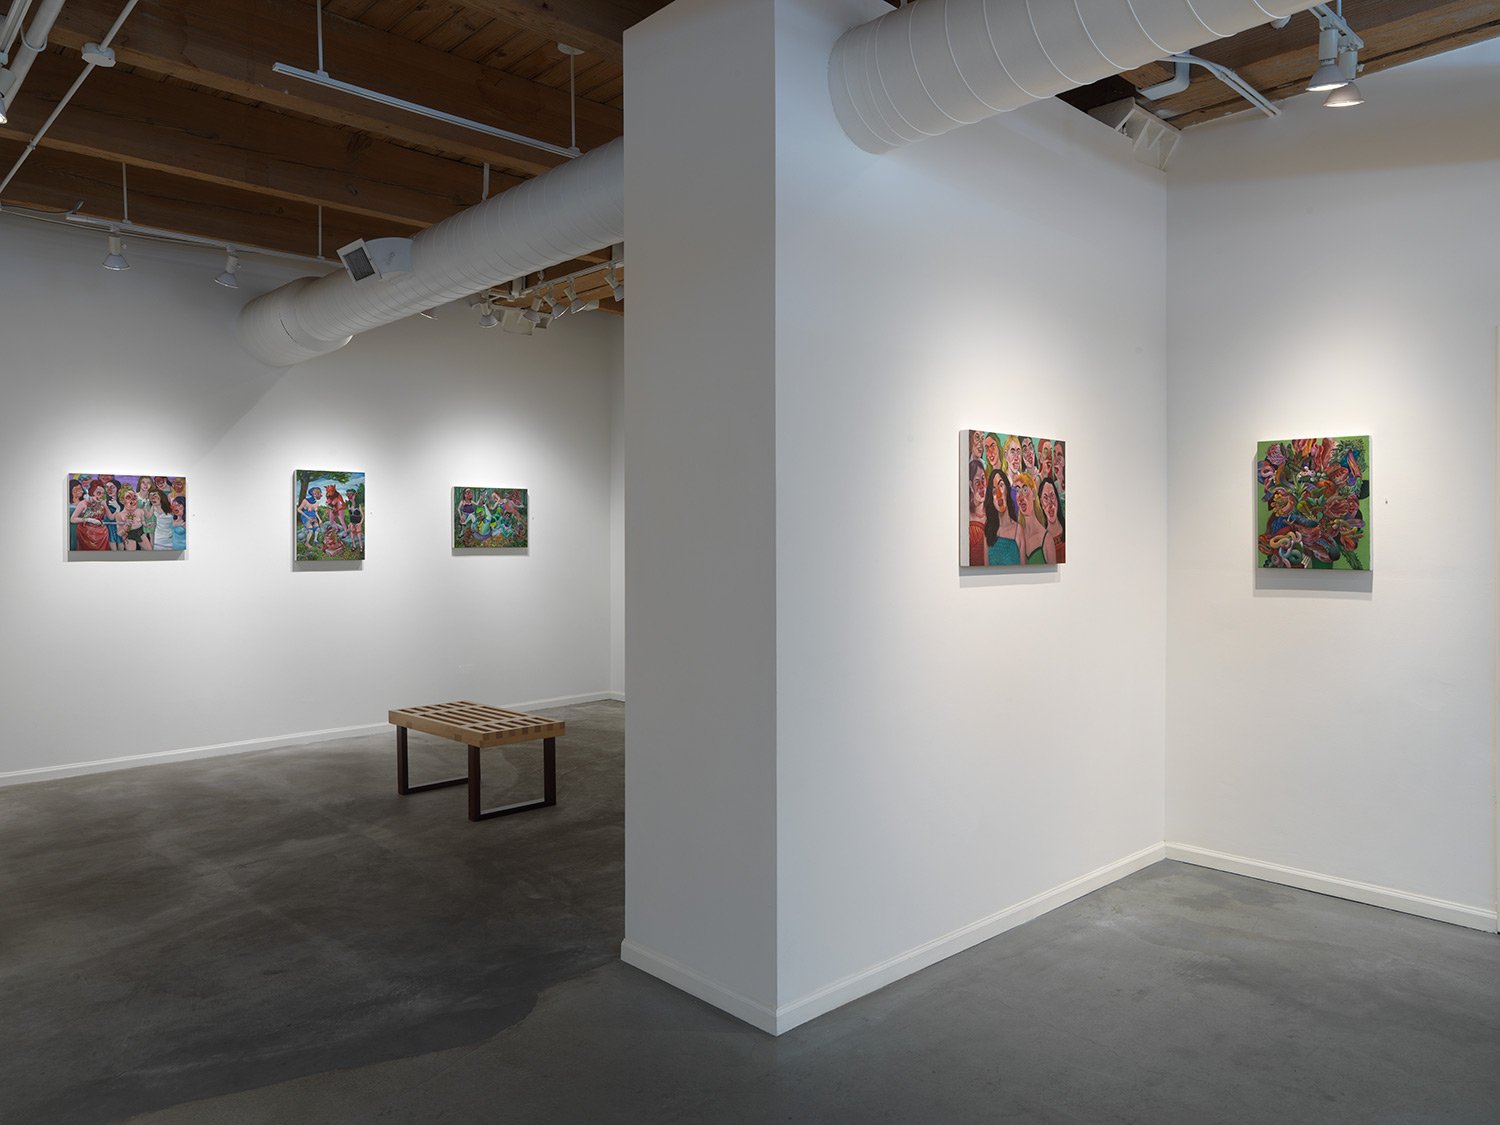 Installation view of Balm of Body, Spice of Flesh at Zg Gallery